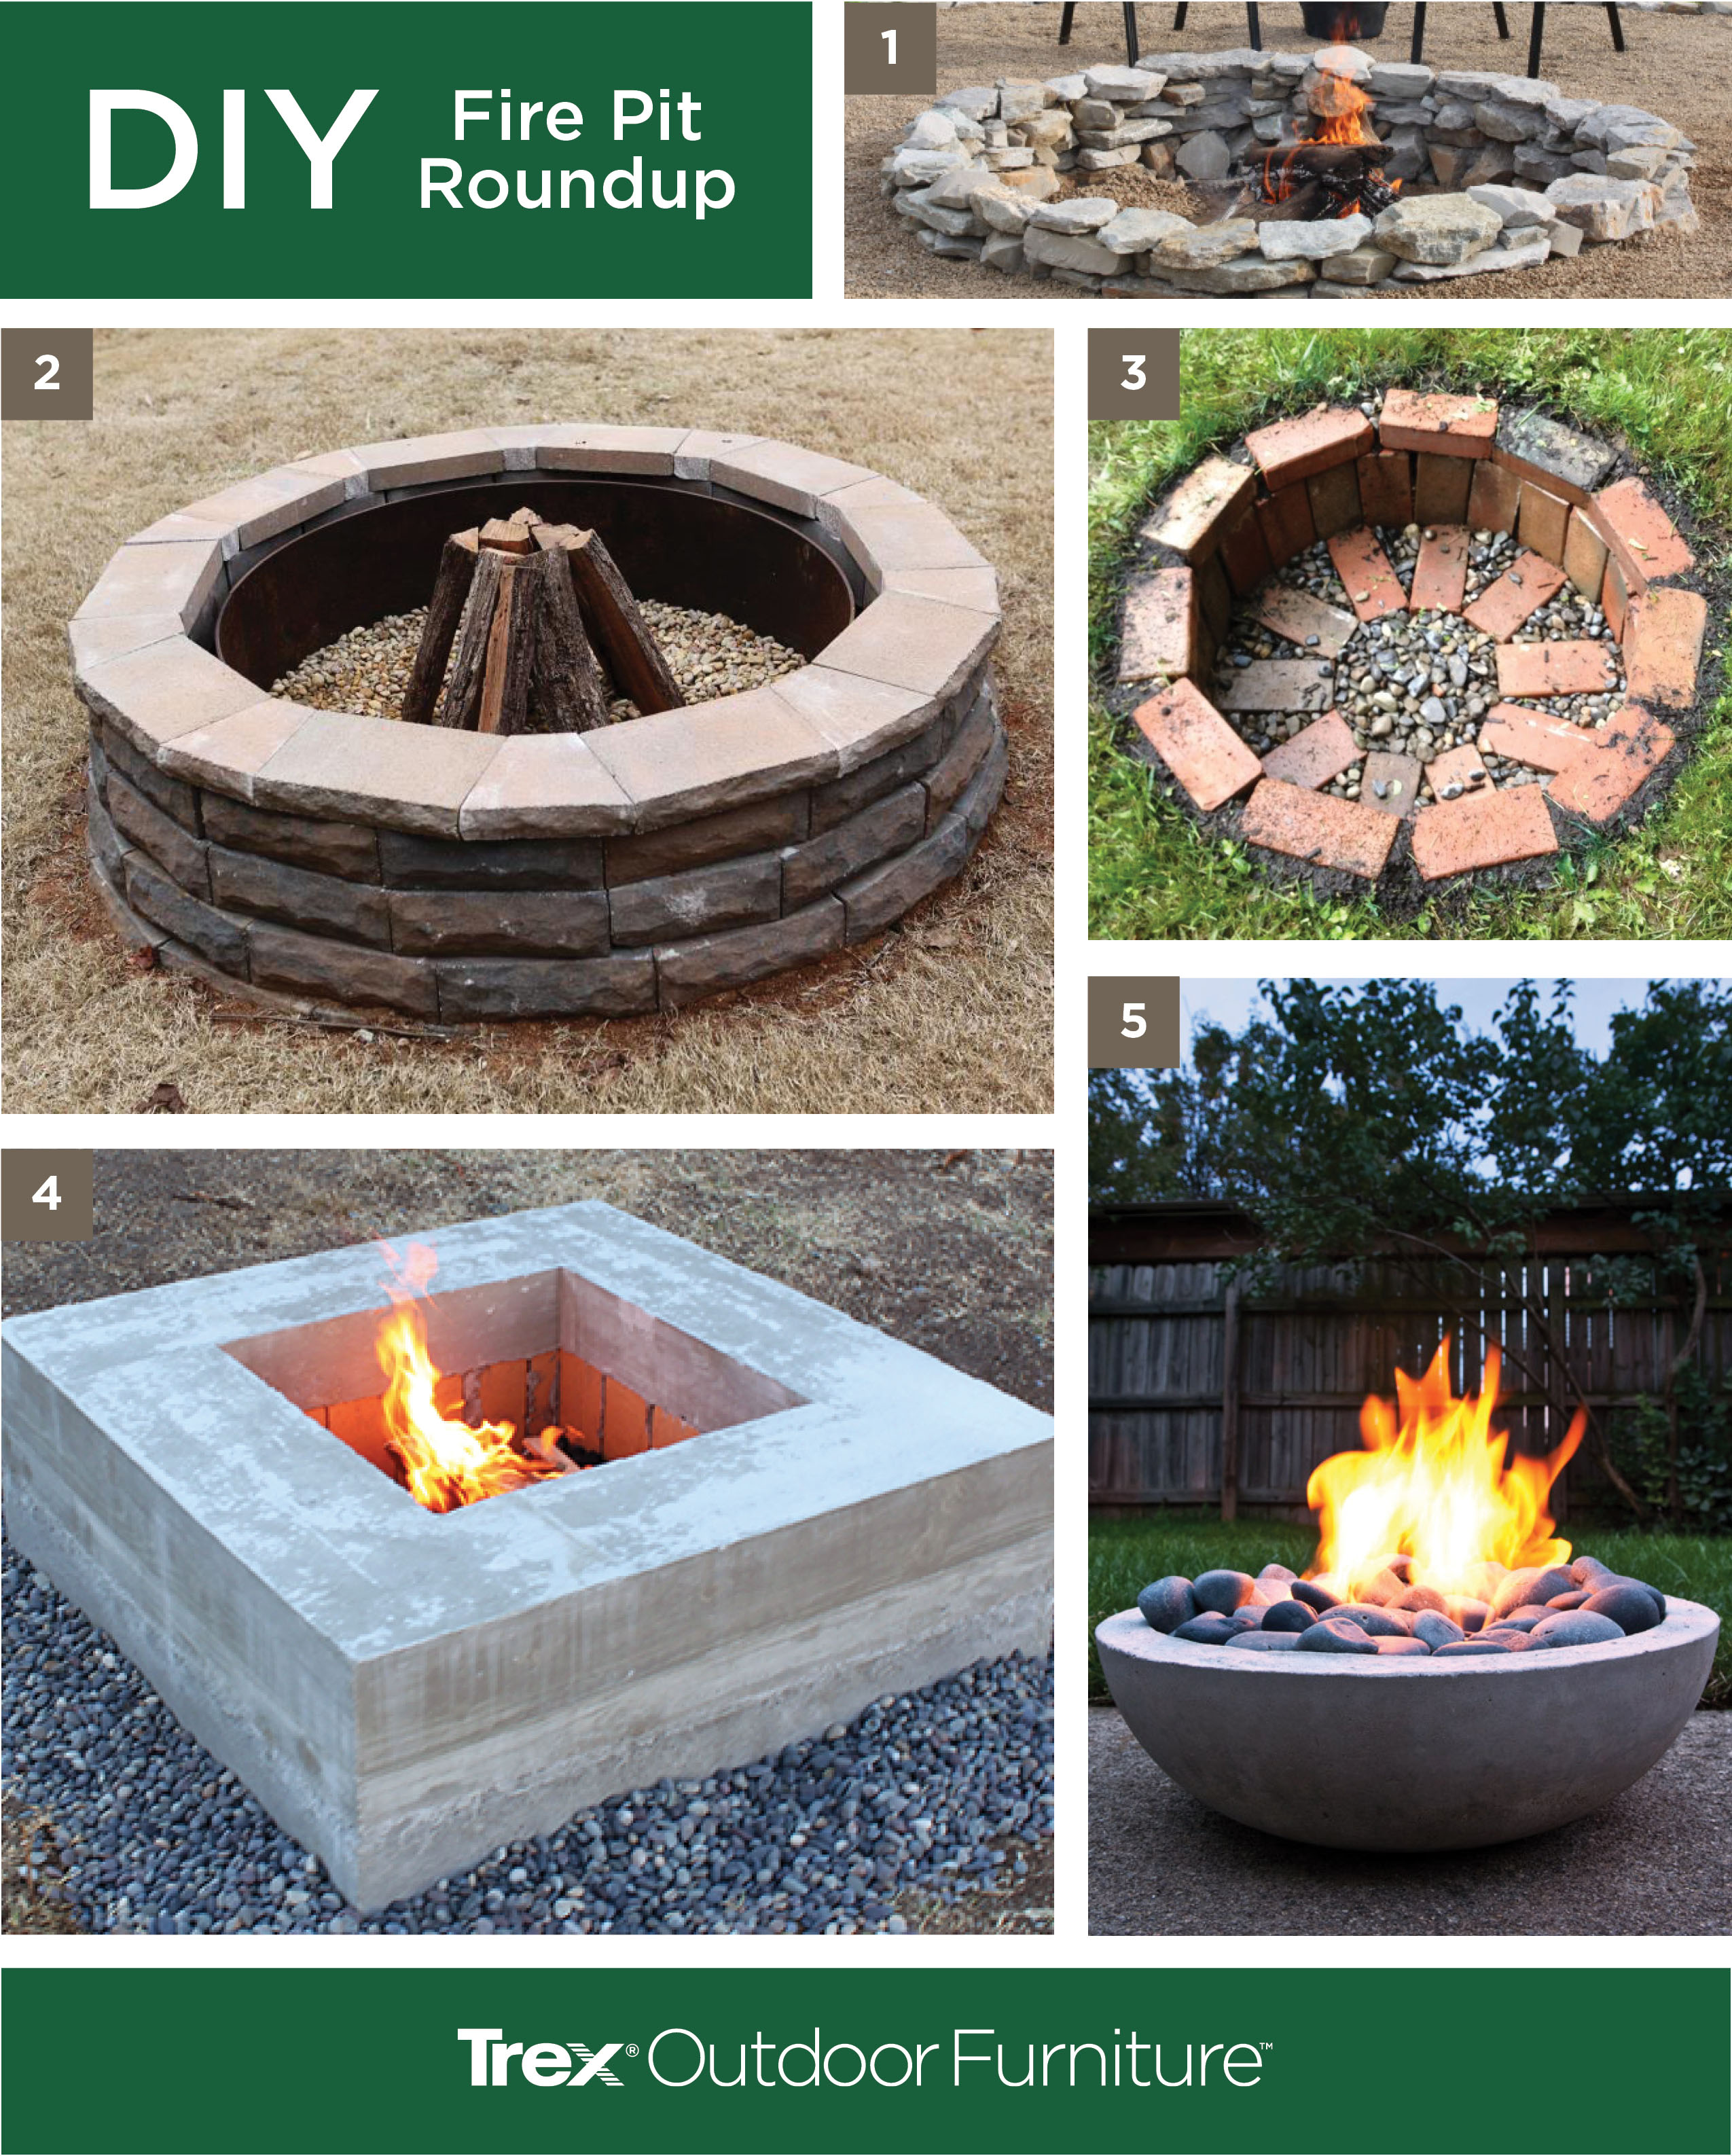 Warm Up With A Diy Fire Pit Living, Digging A Fire Pit